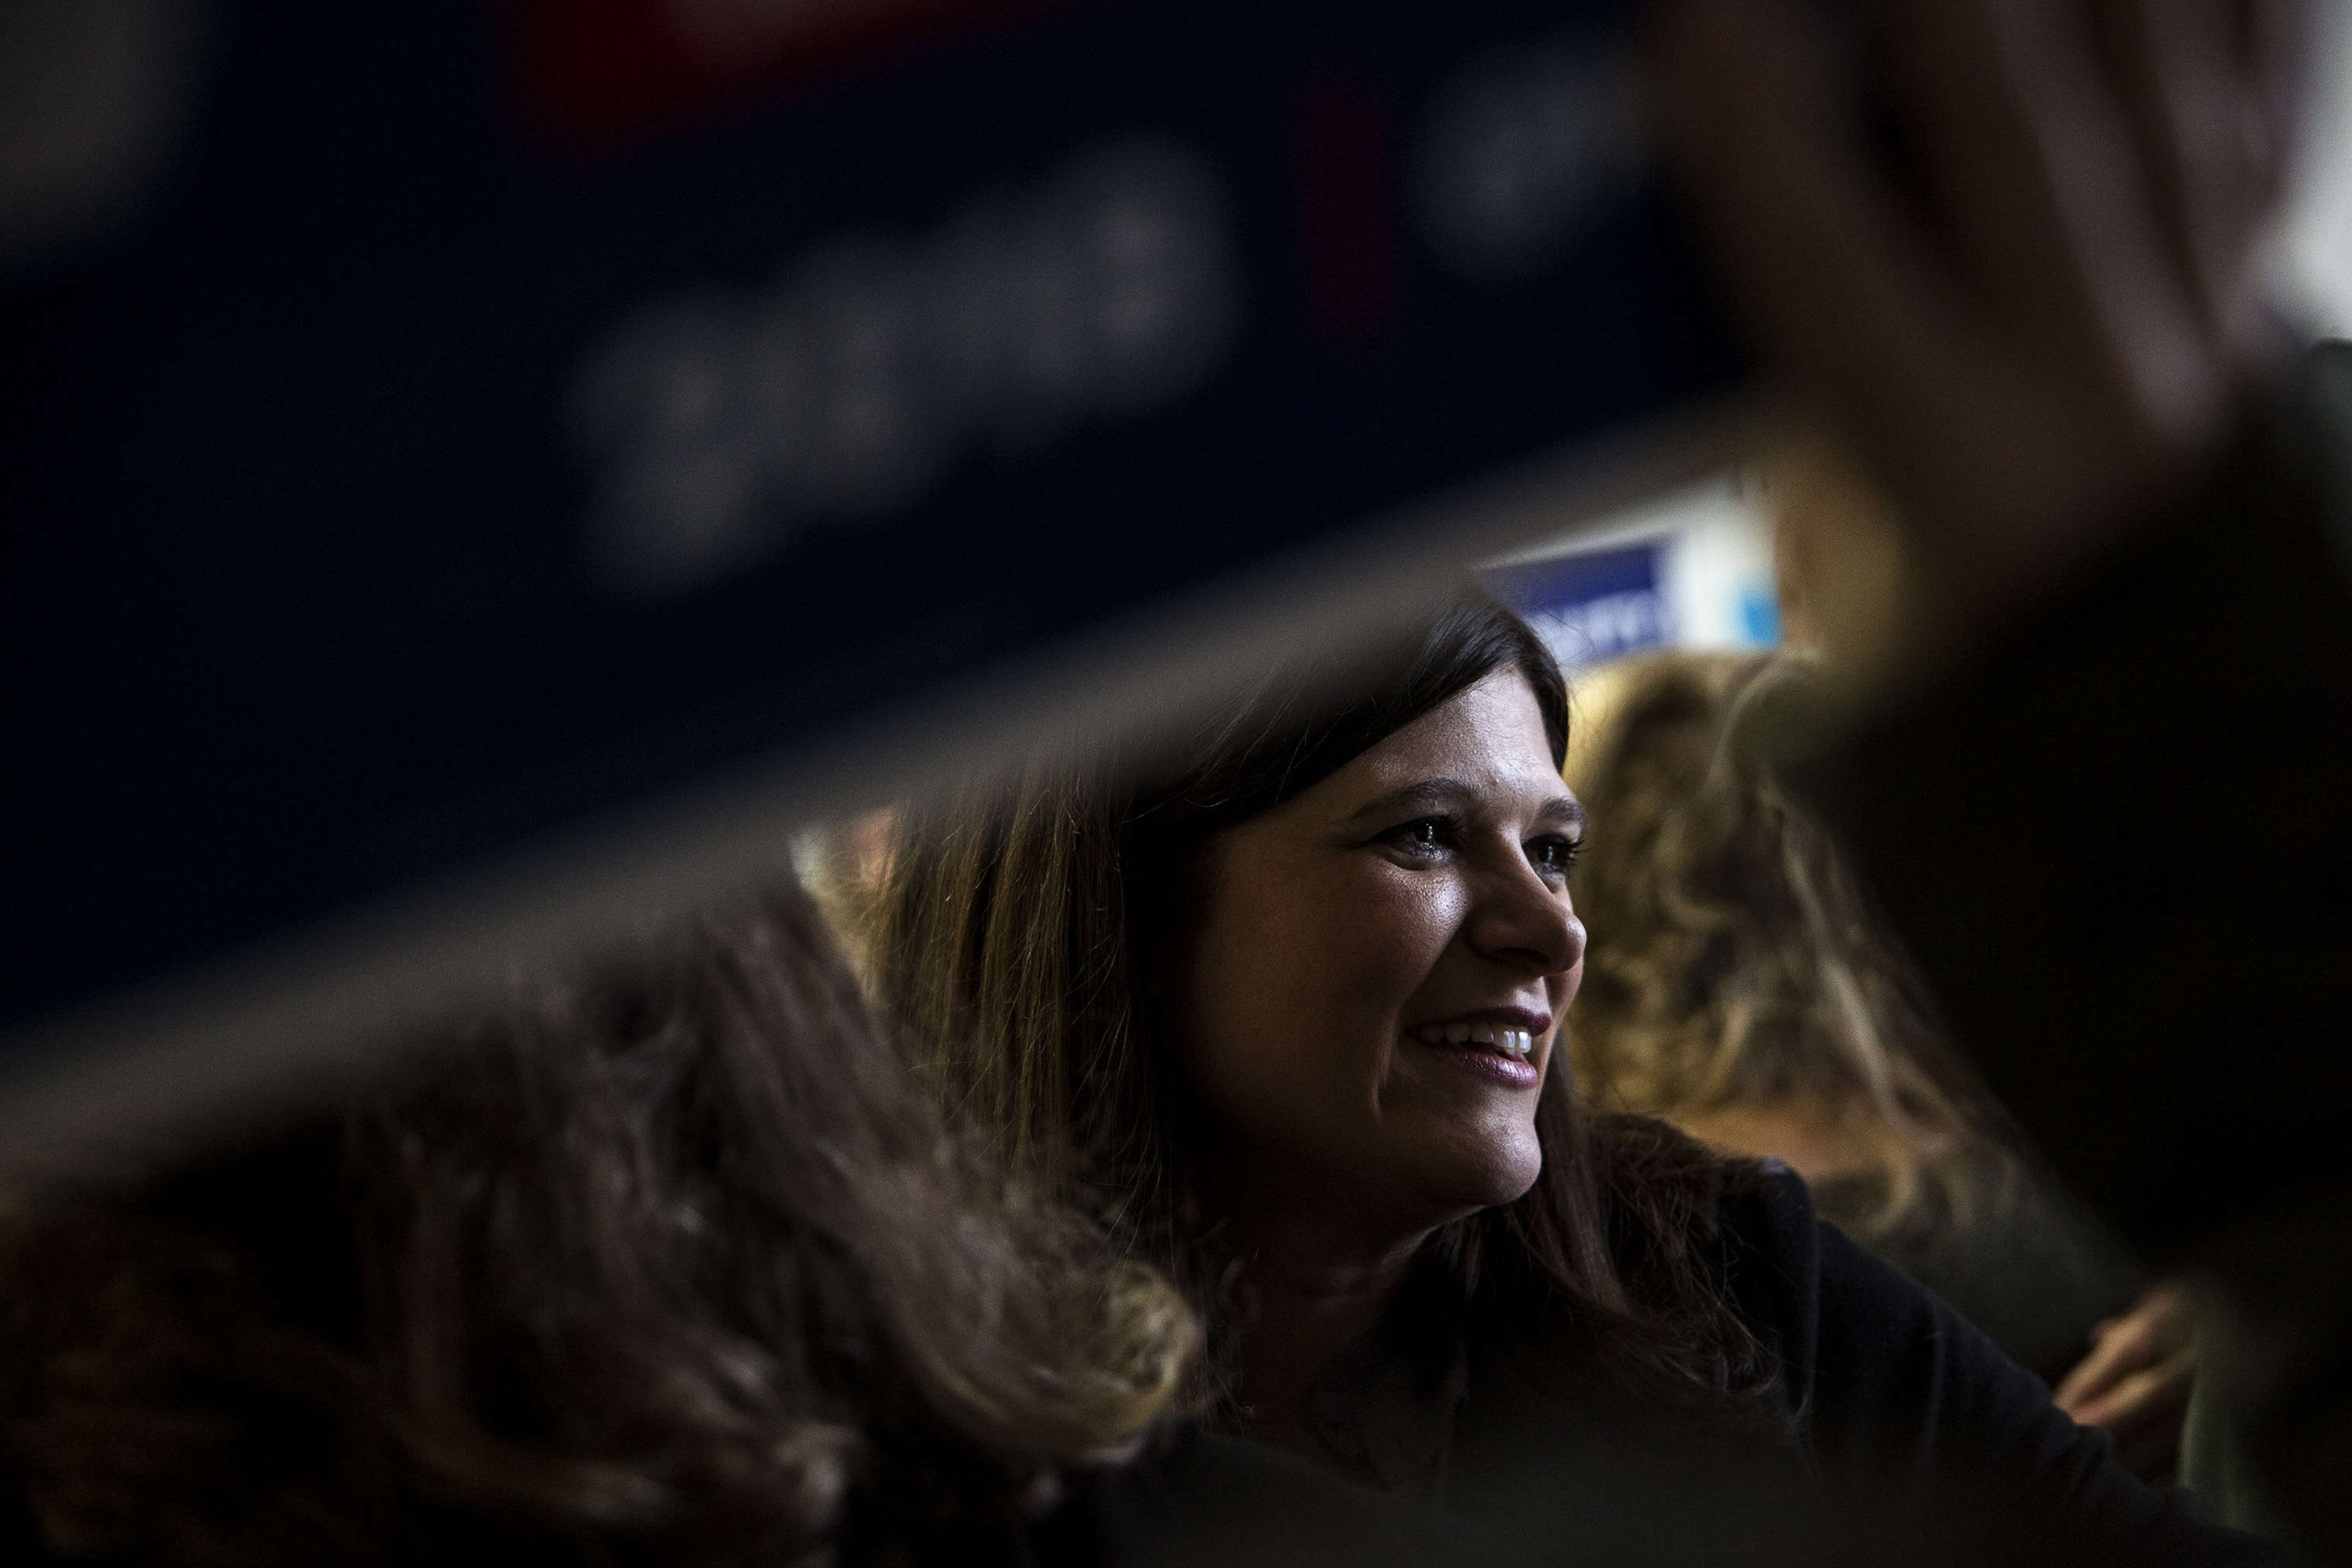 Democratic candidate for Michigan's 11th Congressional District Haley Stevens talks to supporters and volunteers while launching election day canvassing at her Field Office in Troy, Mich. (Erin Kirkland for TIME)